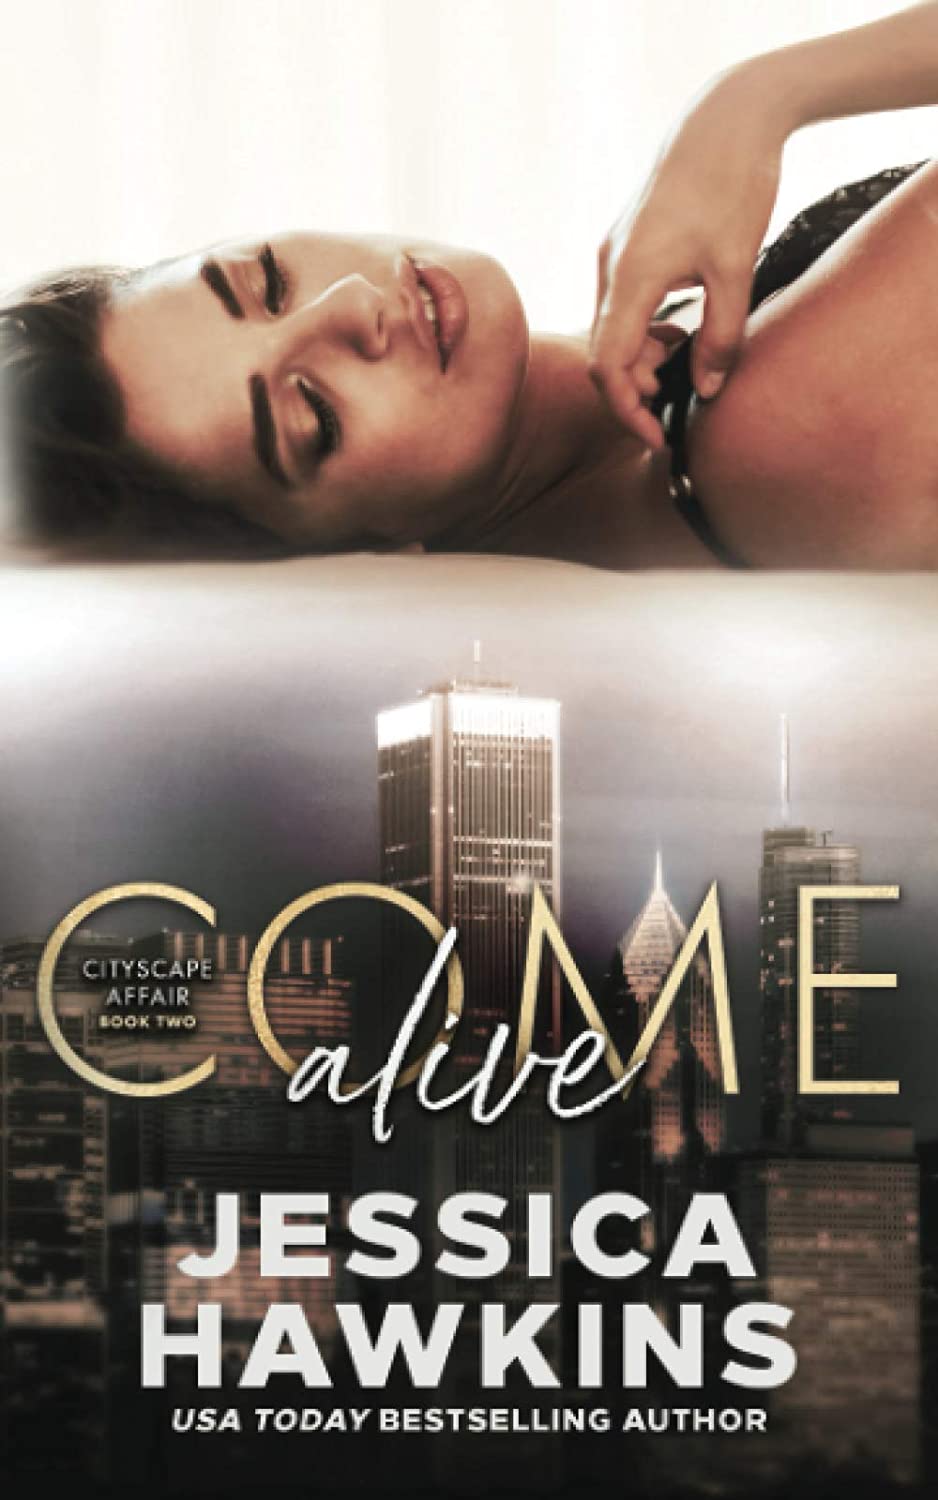 Cityscape Affair Trilogy by Jessica Hawkins